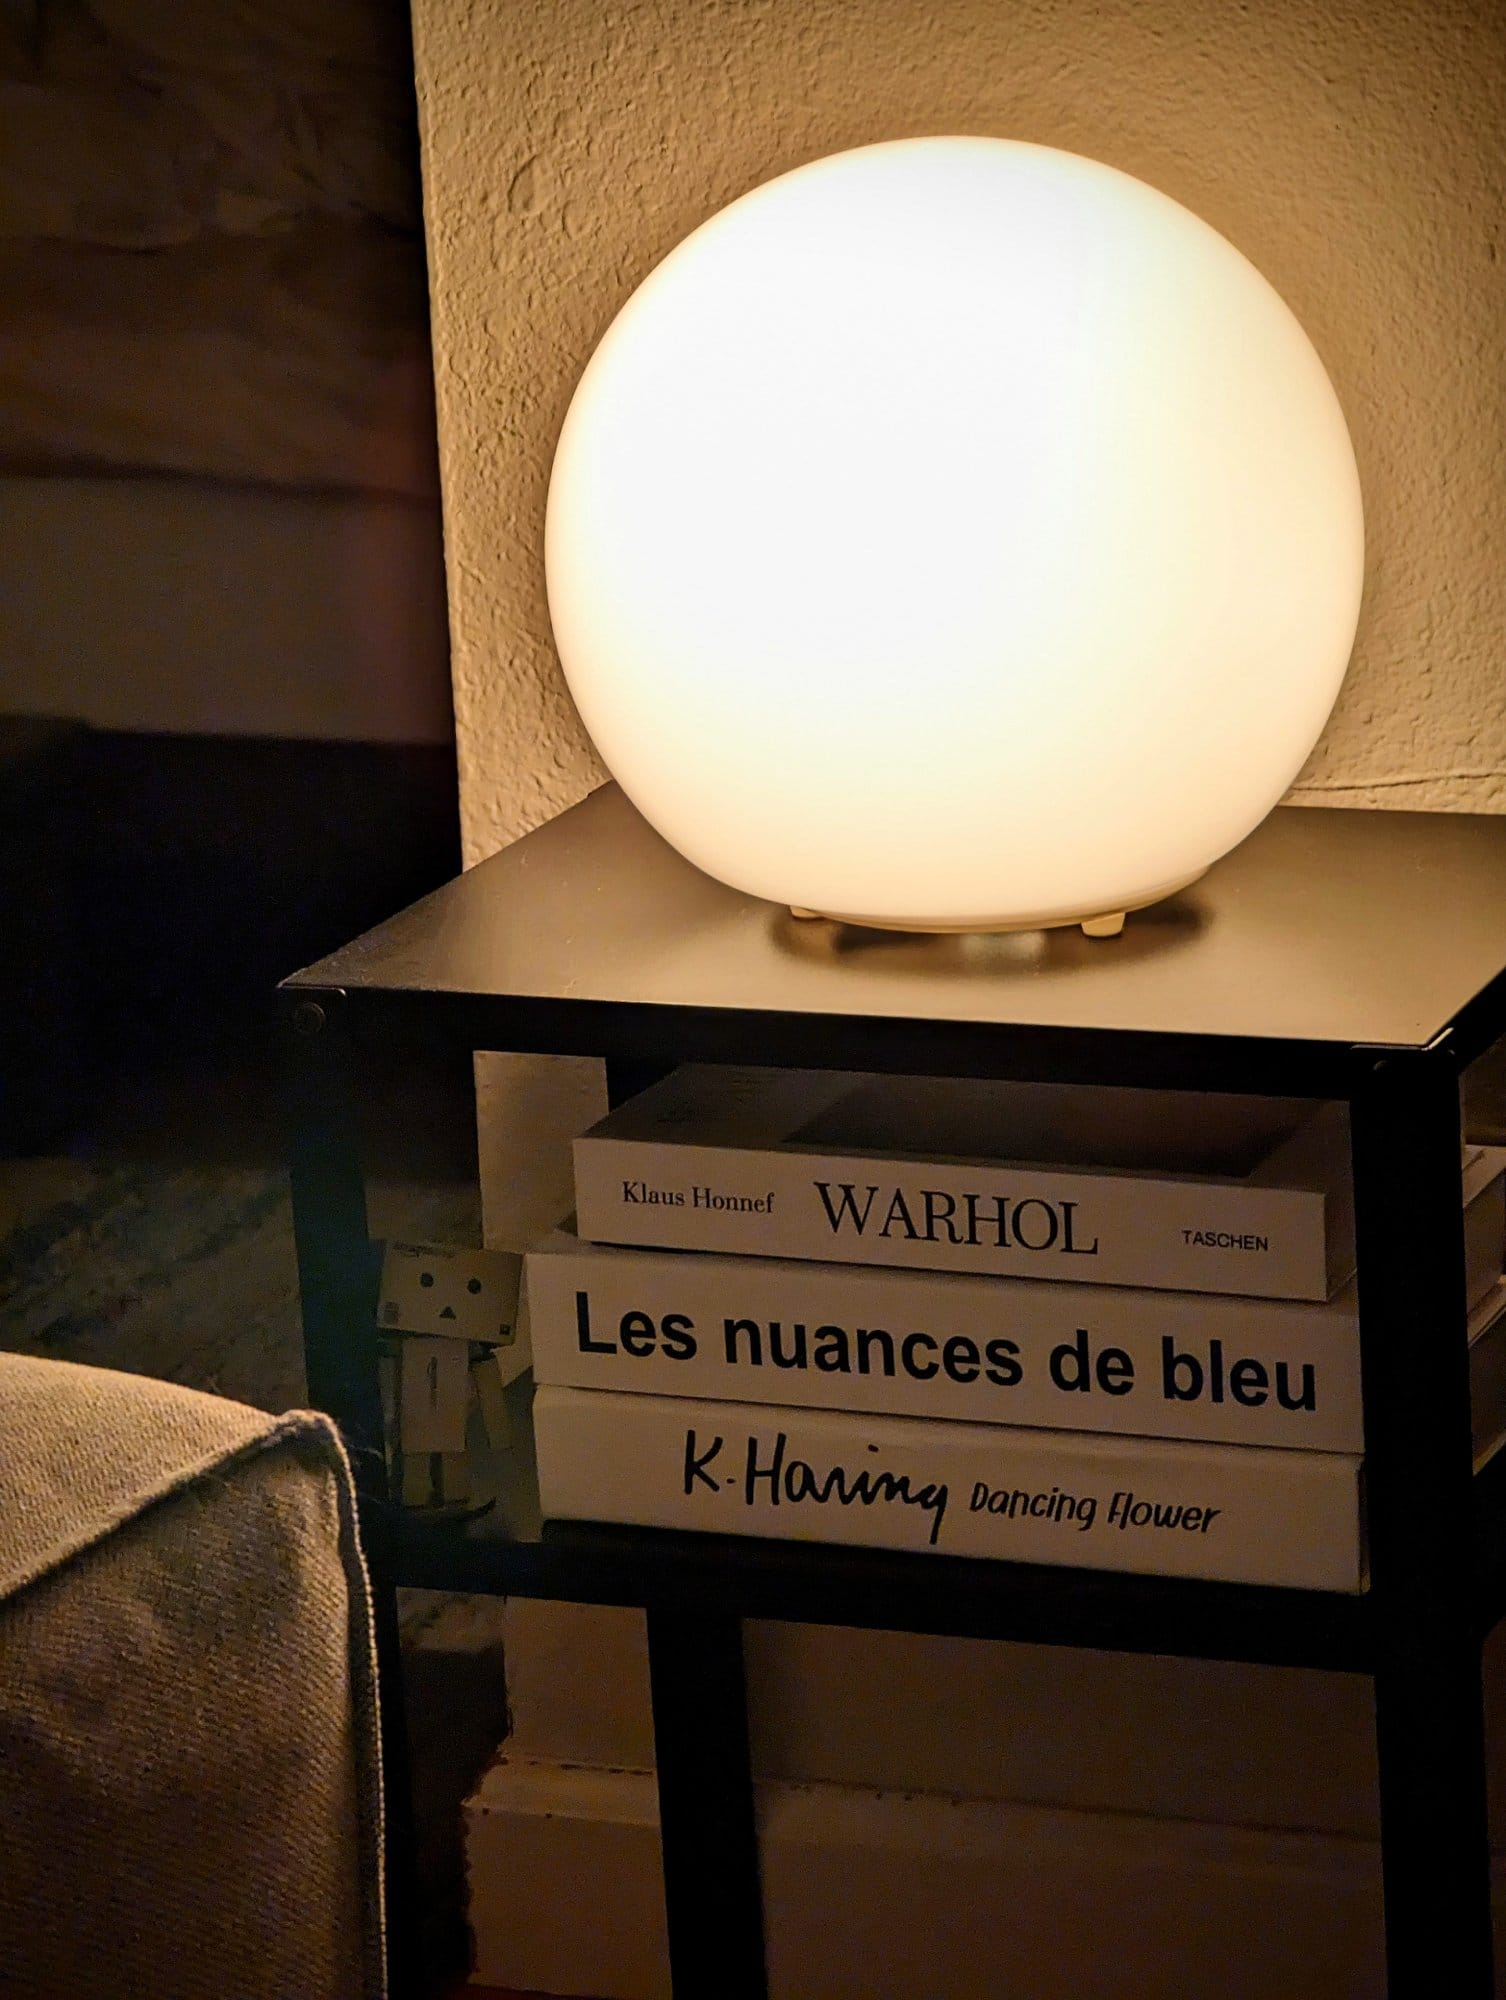 A softly glowing spherical lamp atop a black side table with art books and a small cardboard figure nestled below